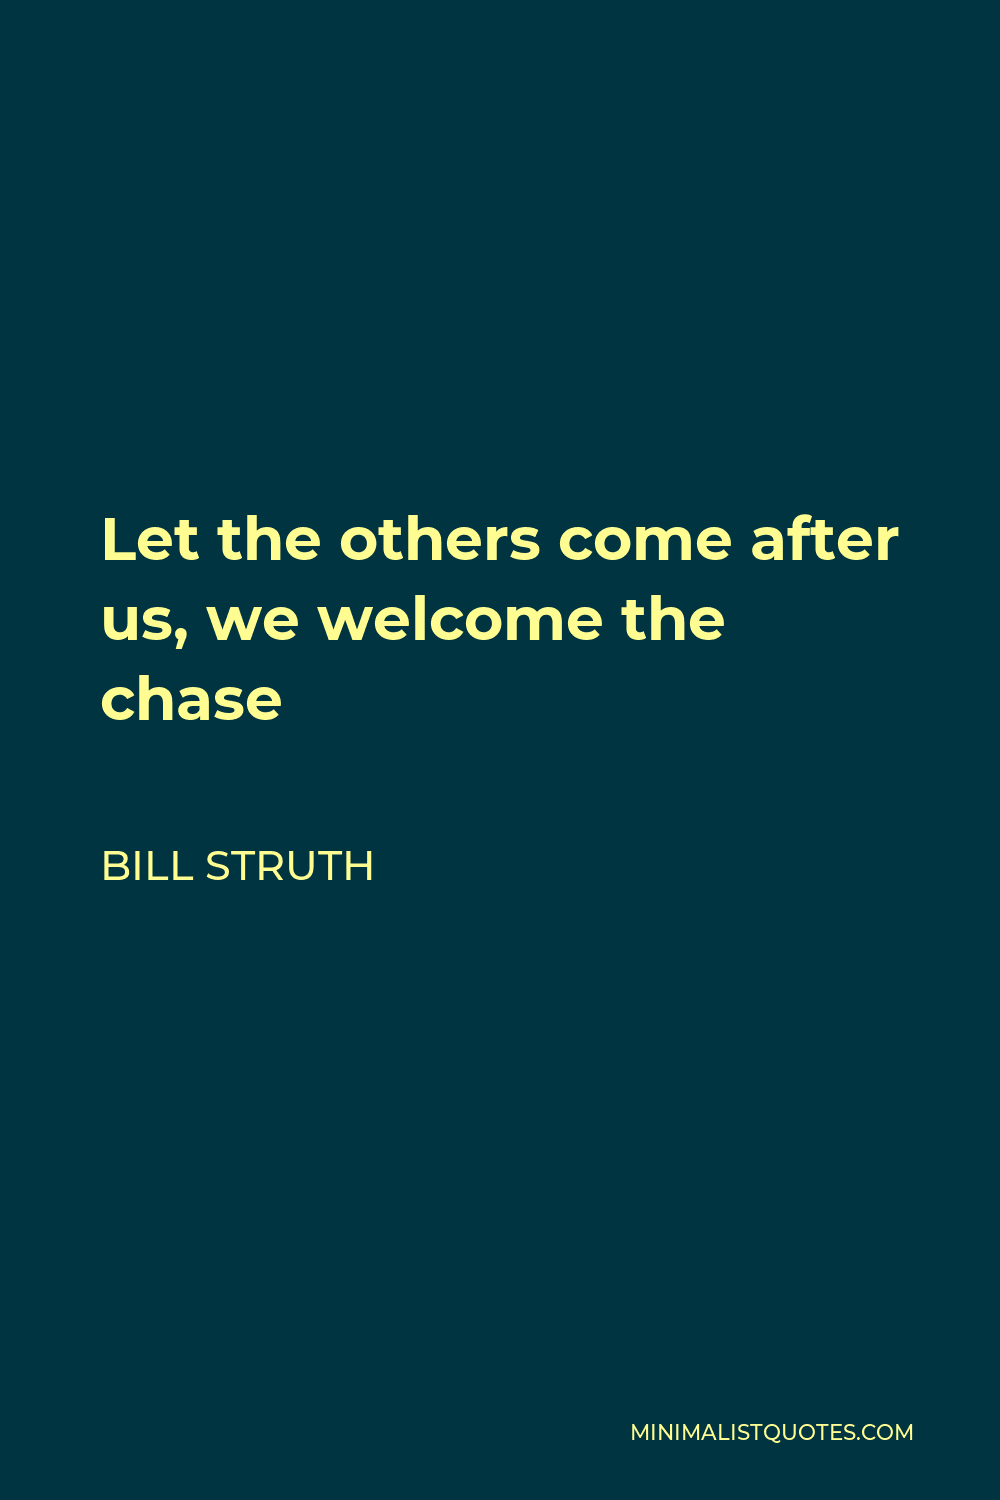 Bill Struth Quote - Let the others come after us. We welcome the chase. It is healthy for us. We will never hide from it.